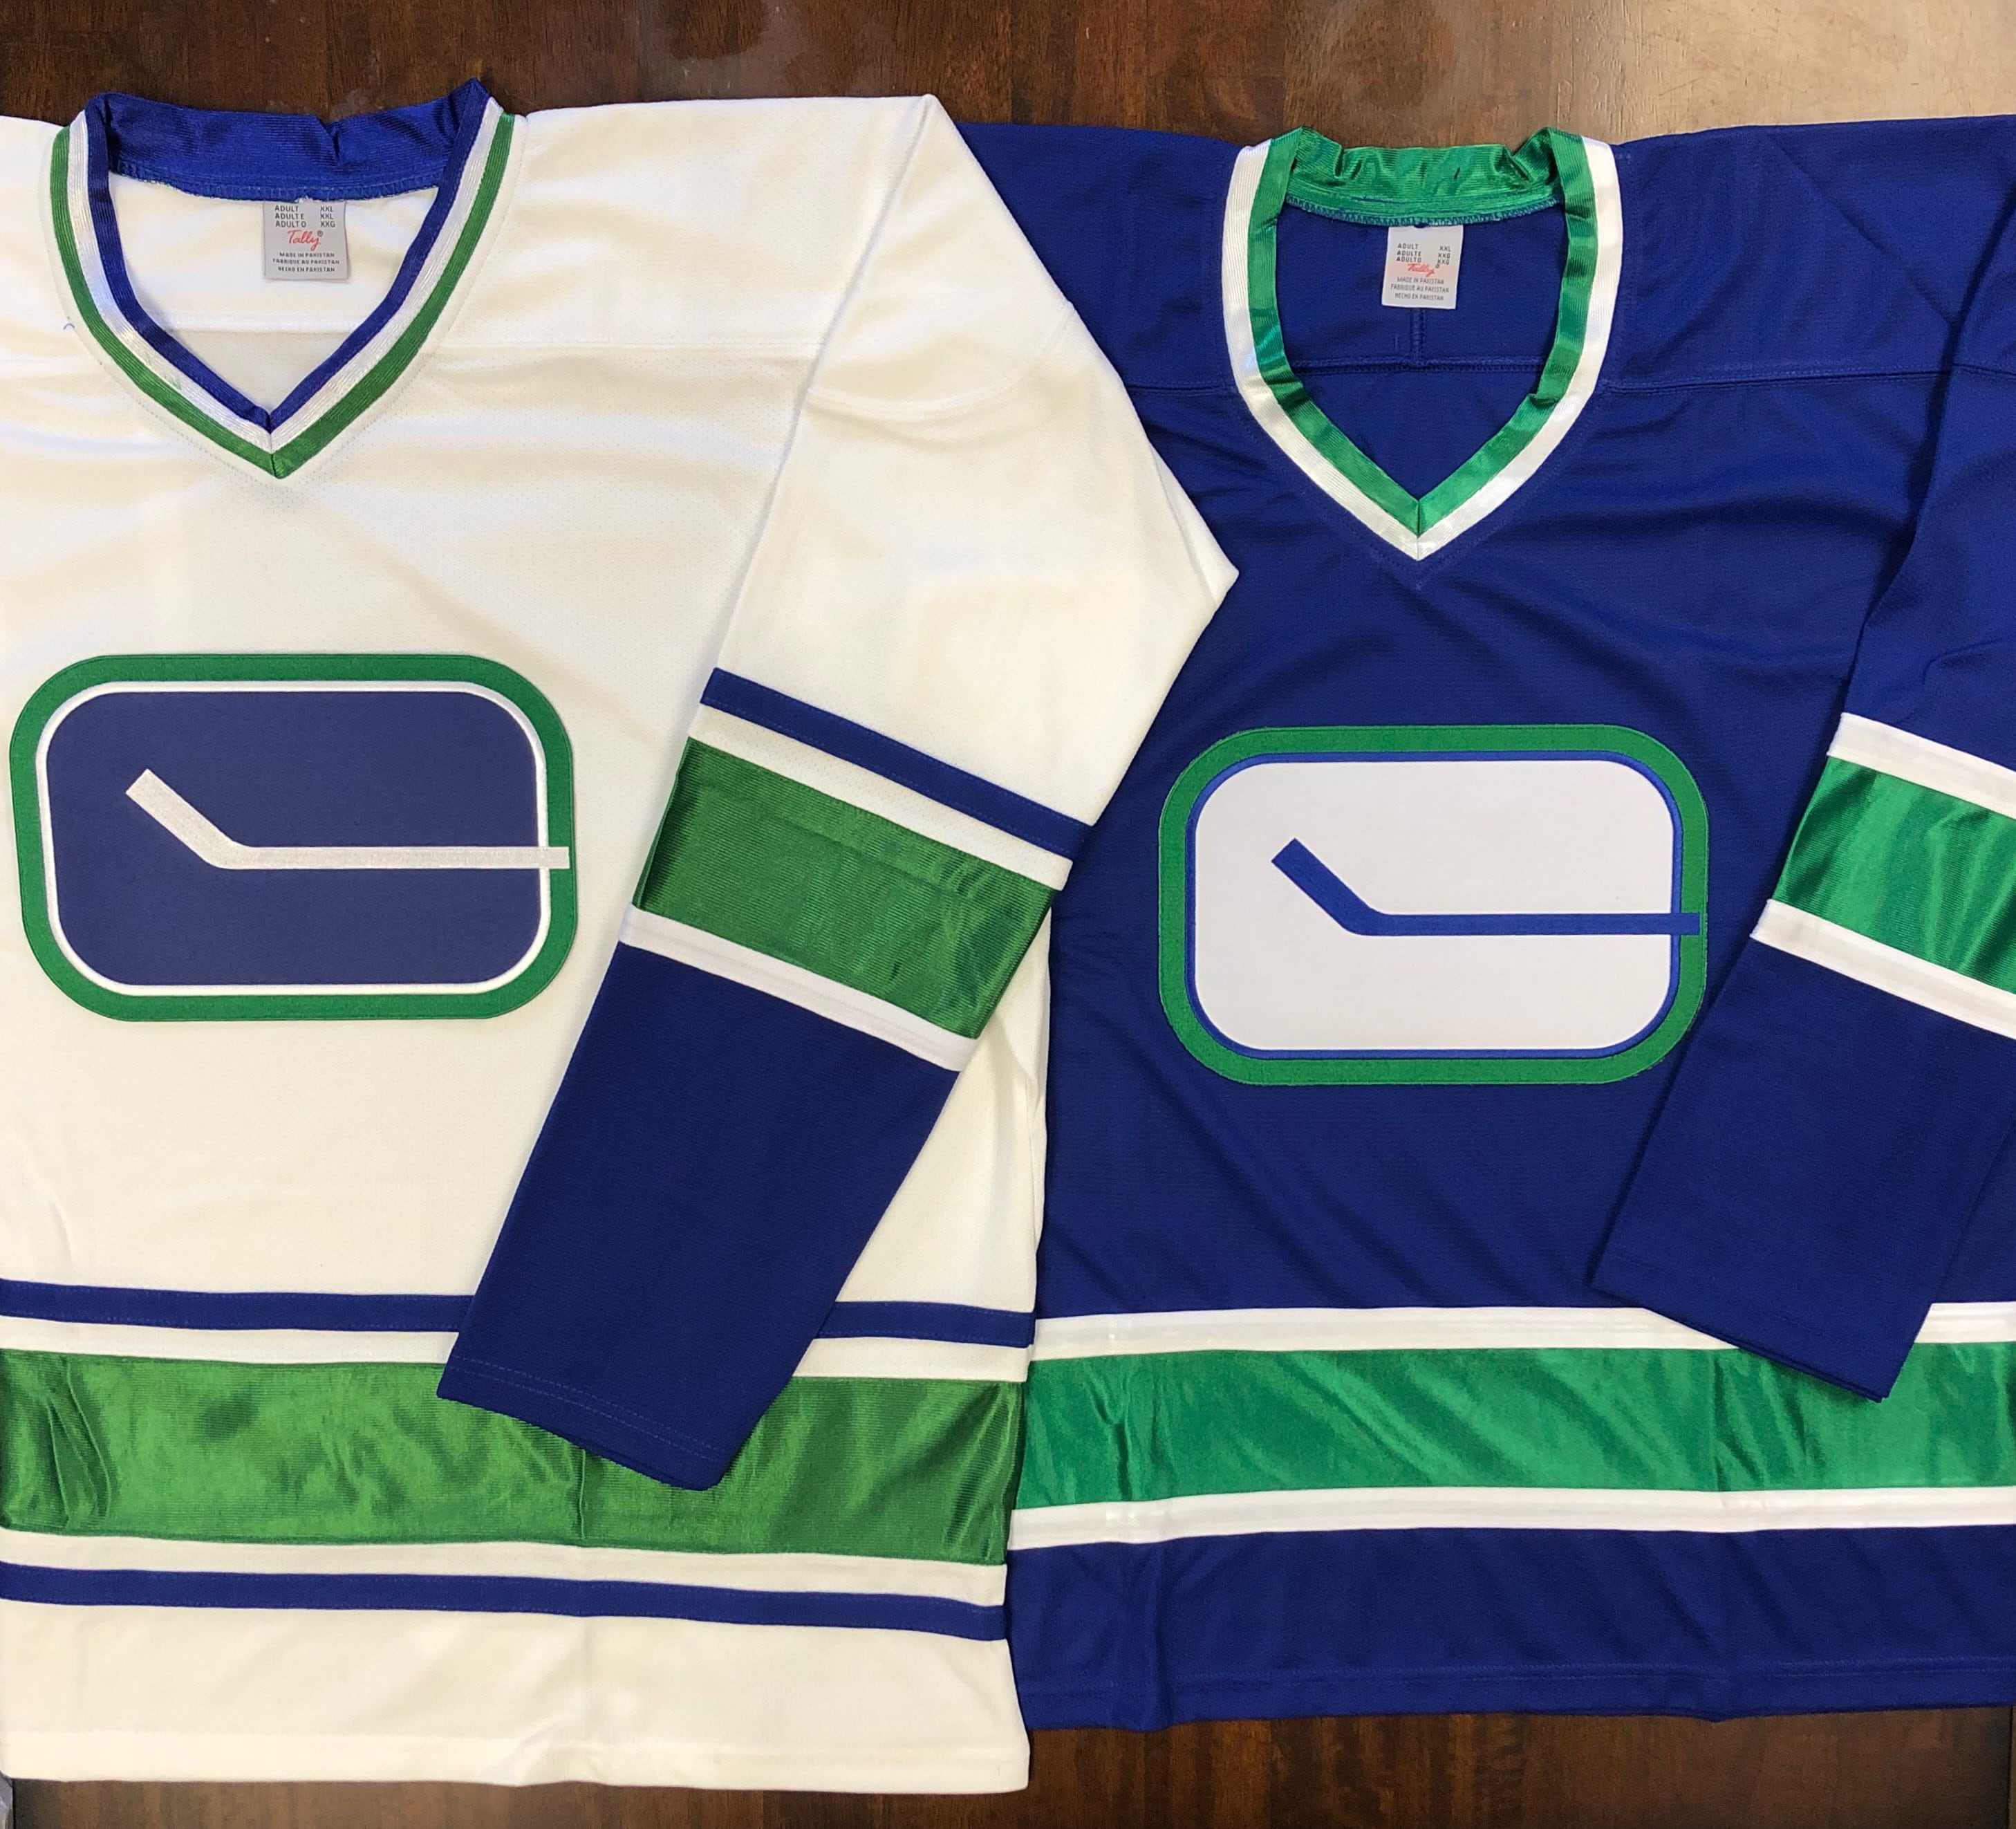 Jerseys of Vancouver: An extremely rare Canuck  Georgia Straight  Vancouver's source for arts, culture, and events